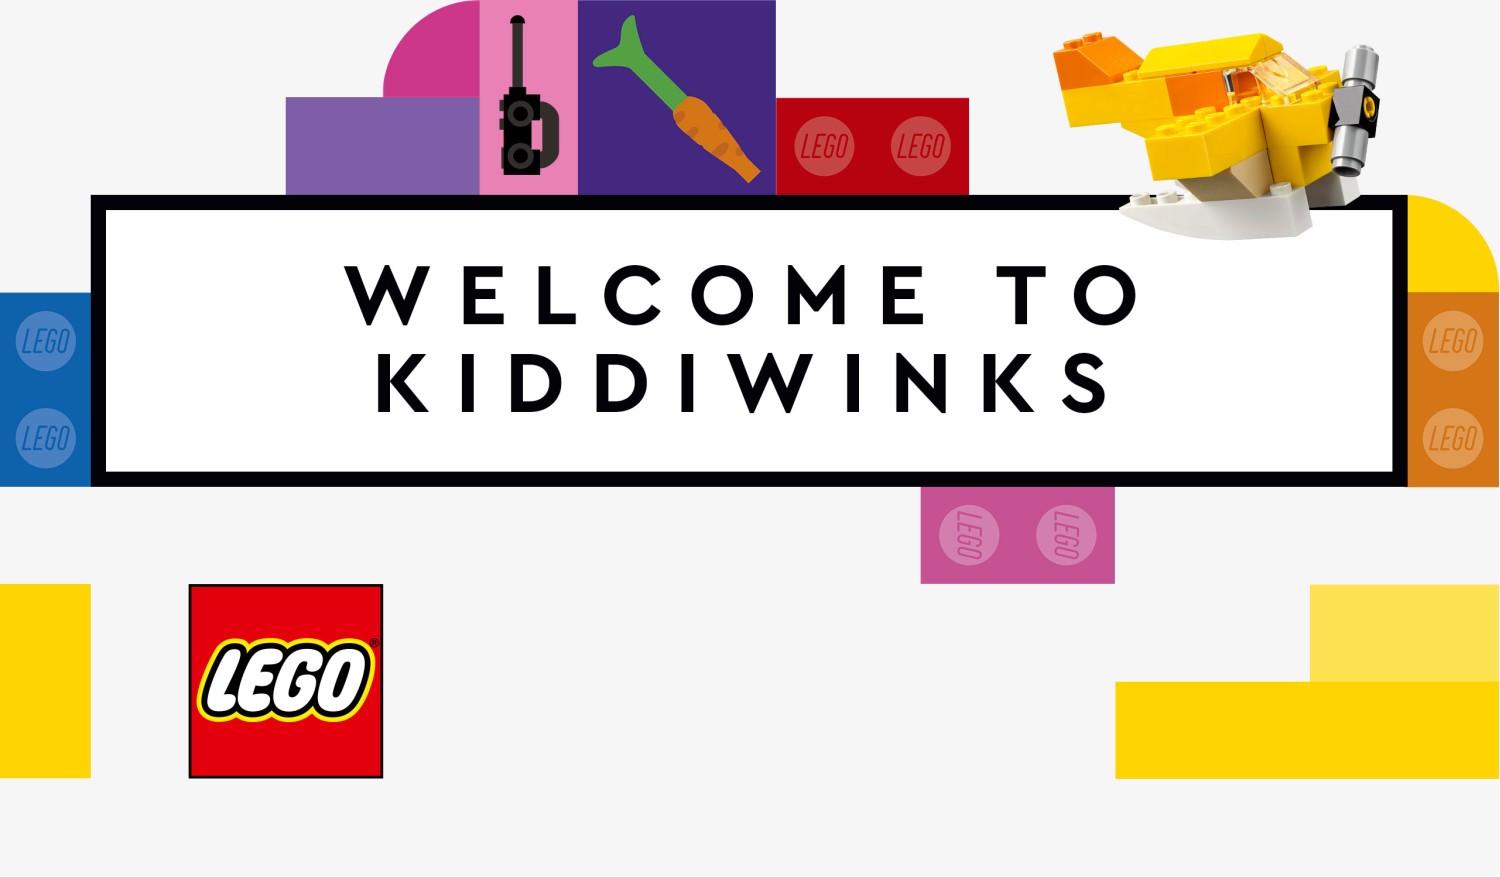 Welcome to the Kiddiwinks LEGO® shop